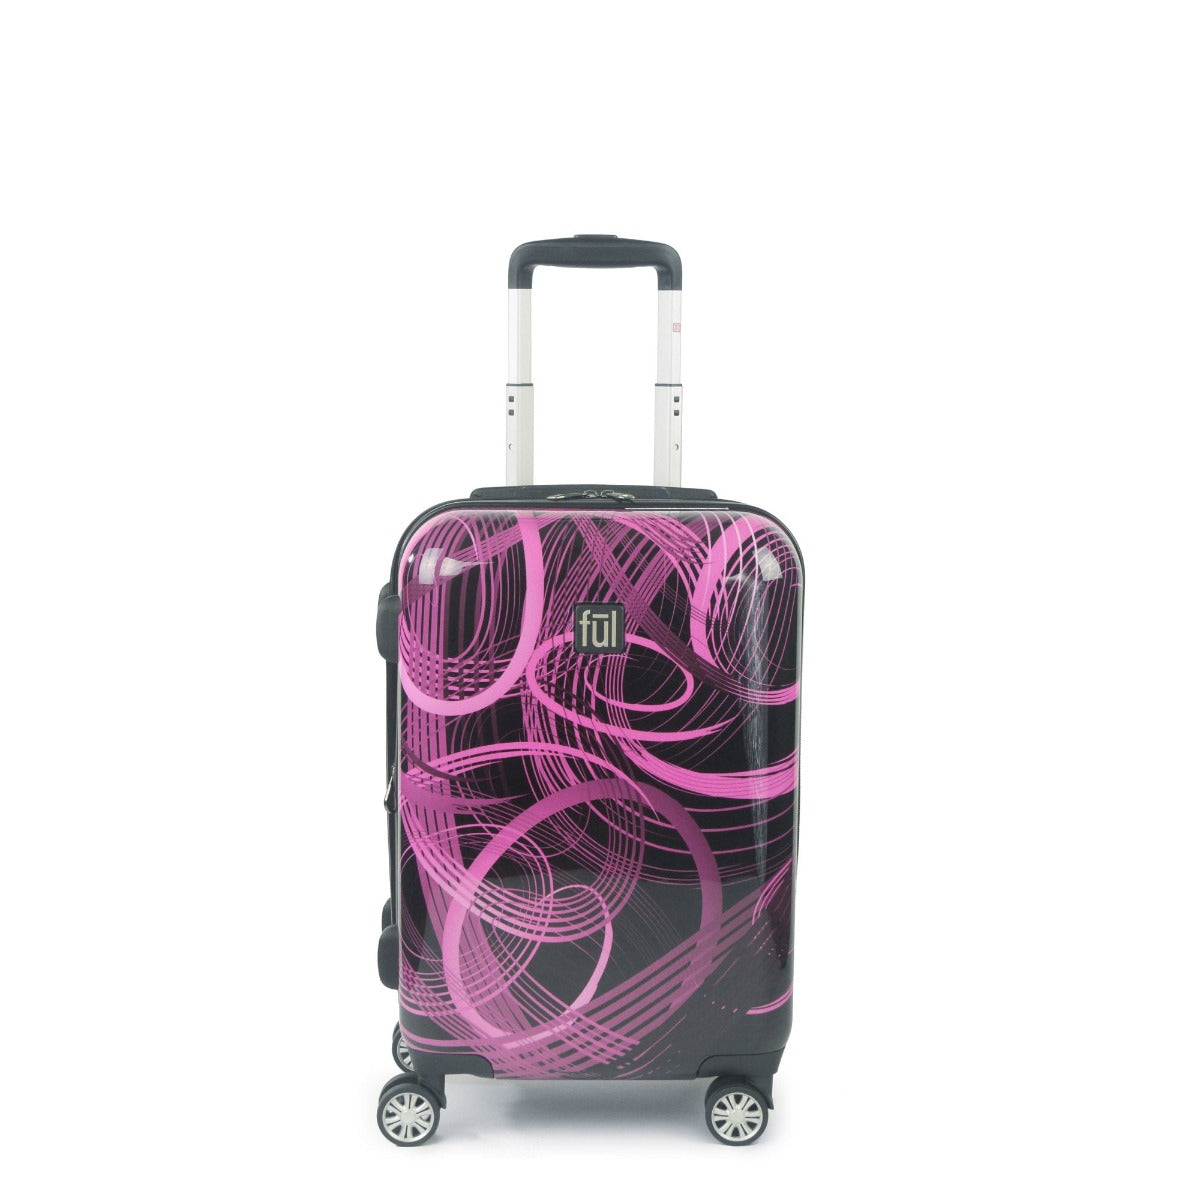 FUL Rolling Luggage Pink Neon Laser 22" Hard Rolling Spinner Carry on Suitcase Pink and Black